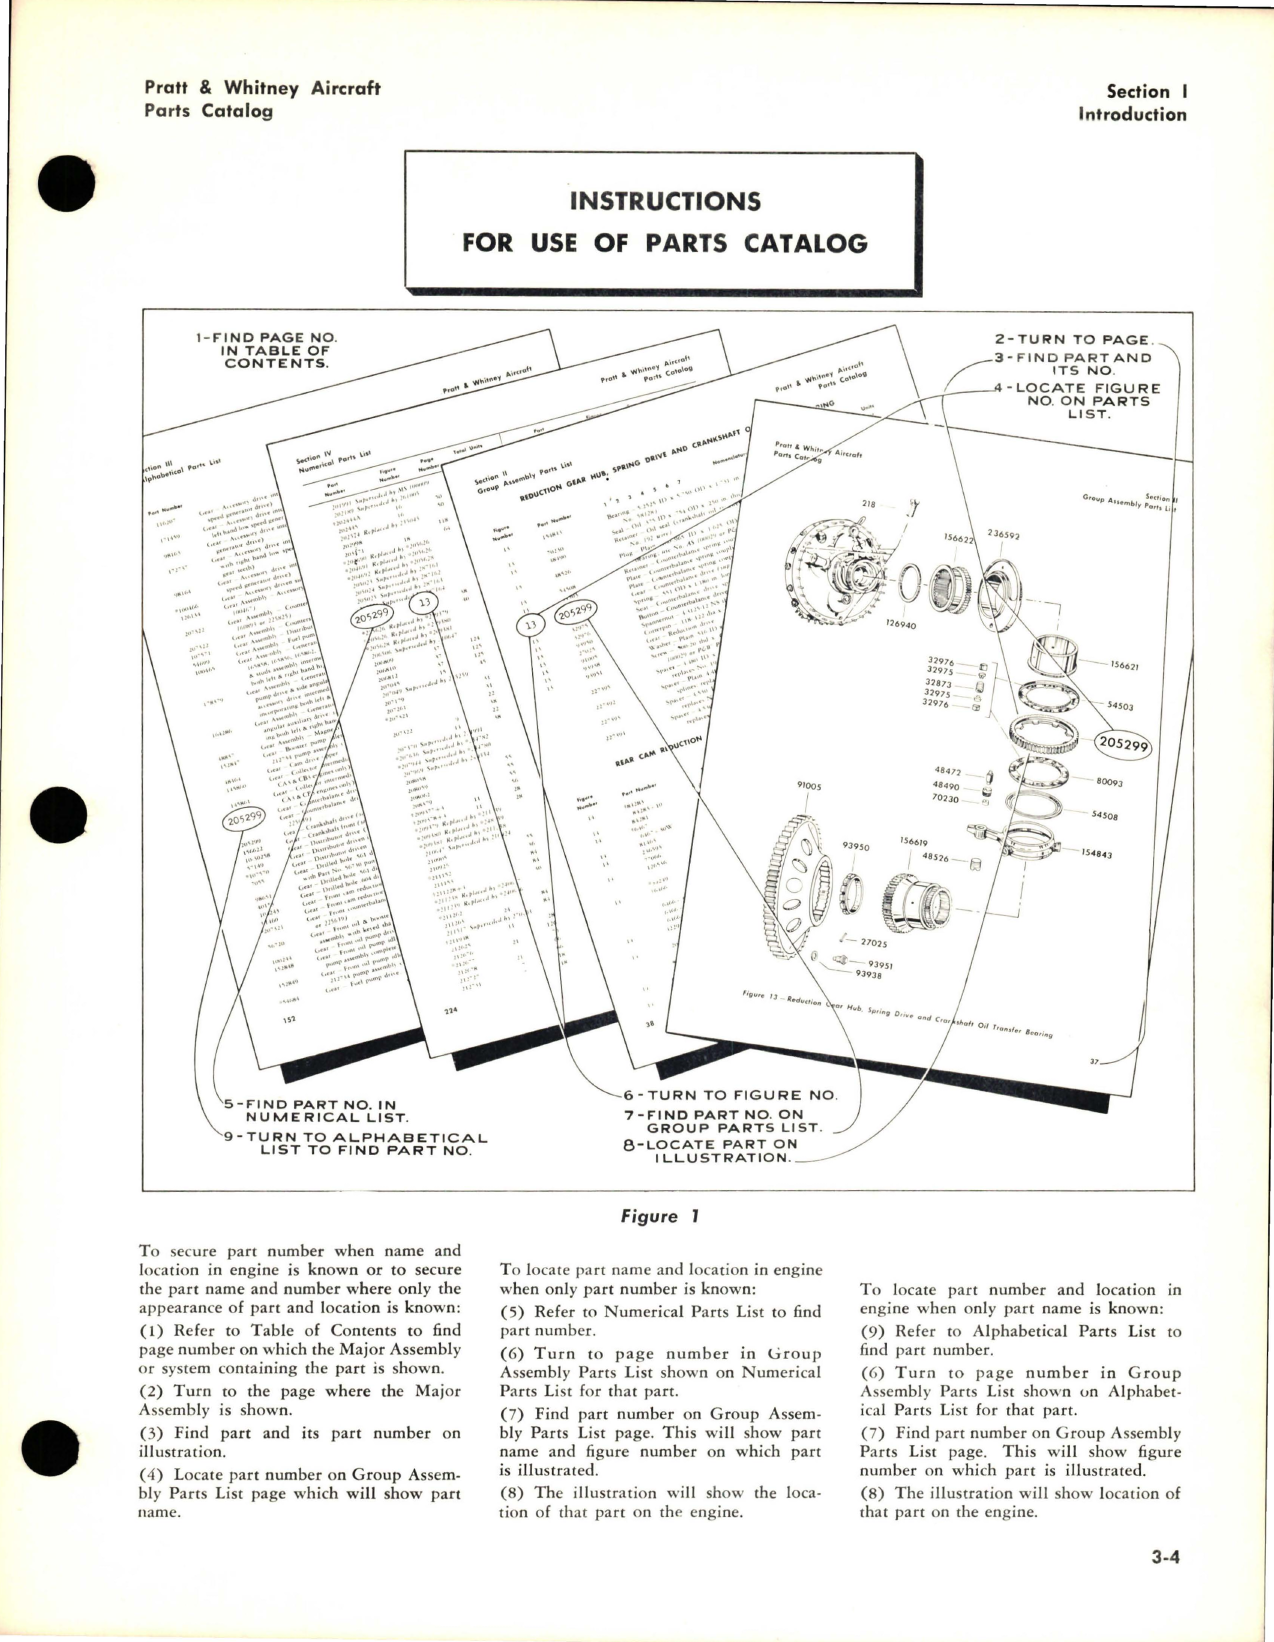 Sample page 9 from AirCorps Library document: Illustrated Parts Catalog for Double Wasp CA-3, CA18, CB3, CB16 and CB17 Engines - Part 119472